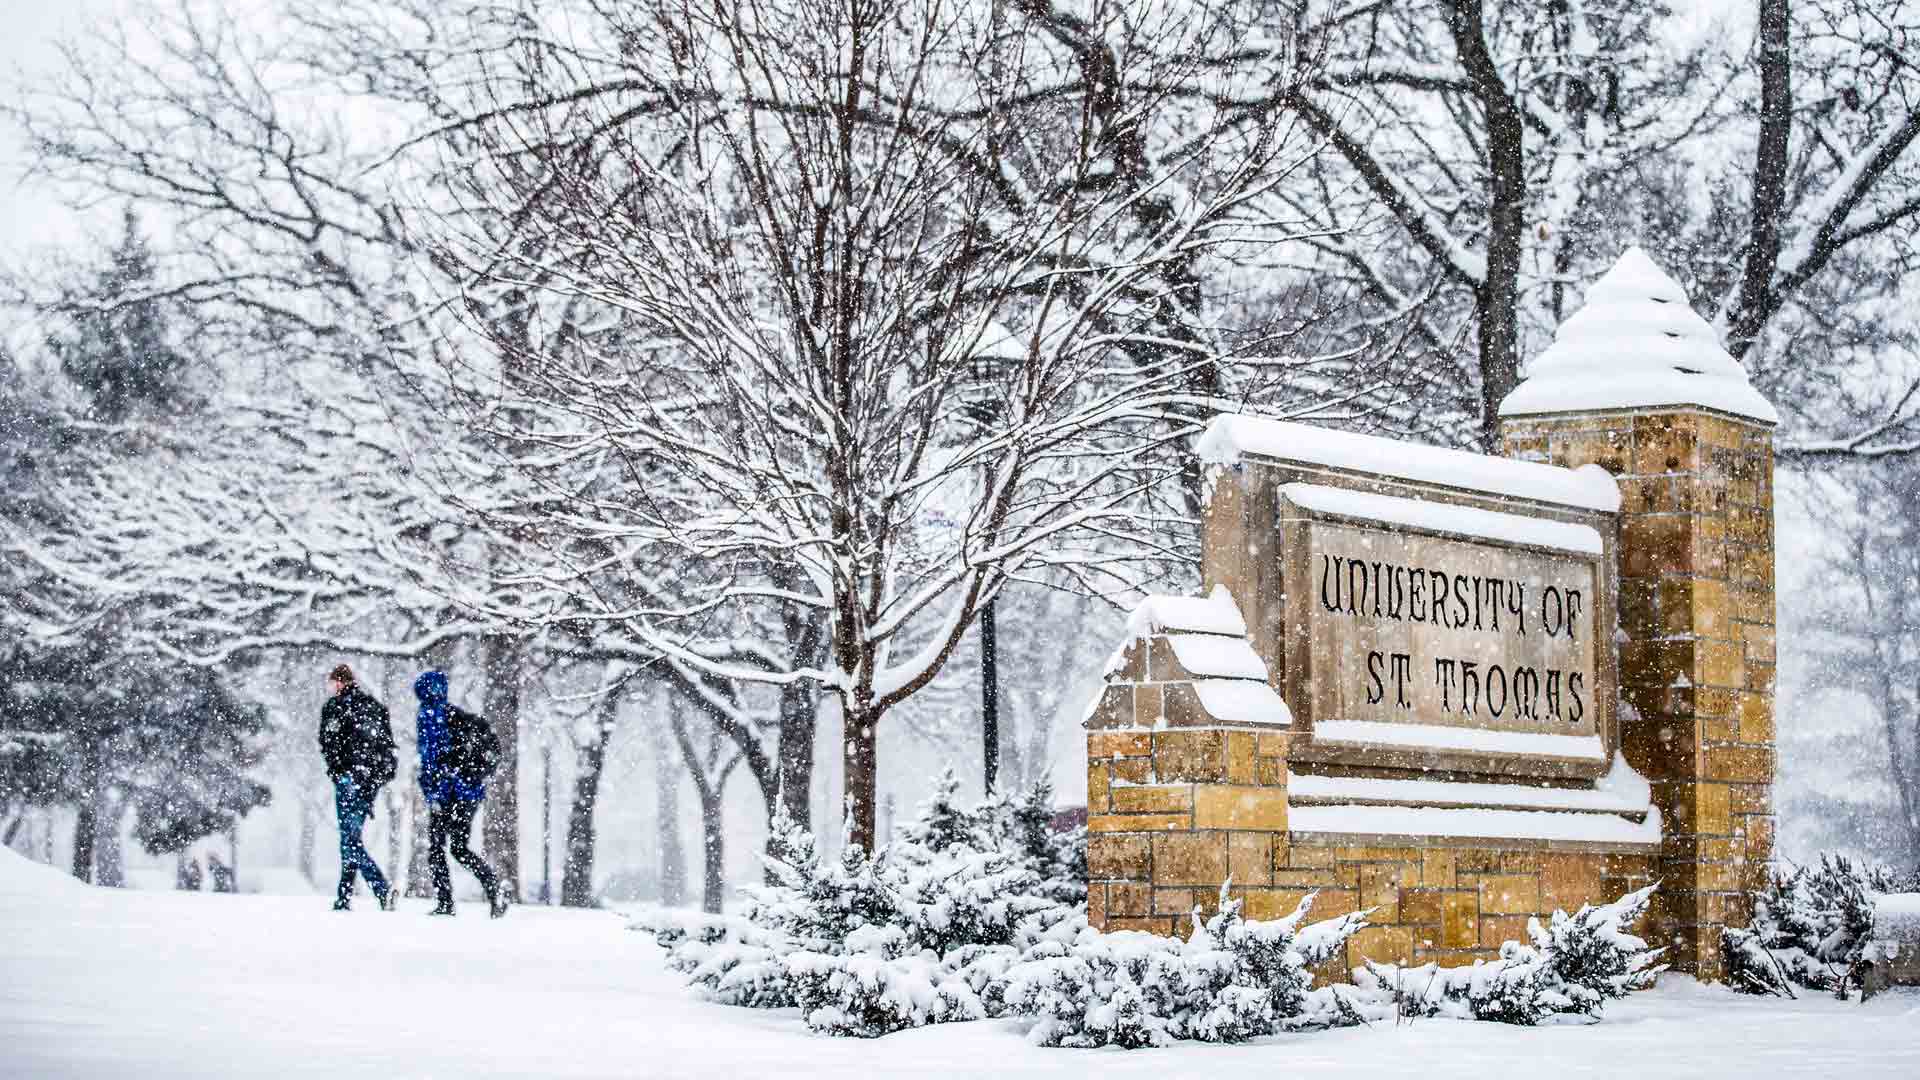 University of St. Thomas stone sign covered in snow.